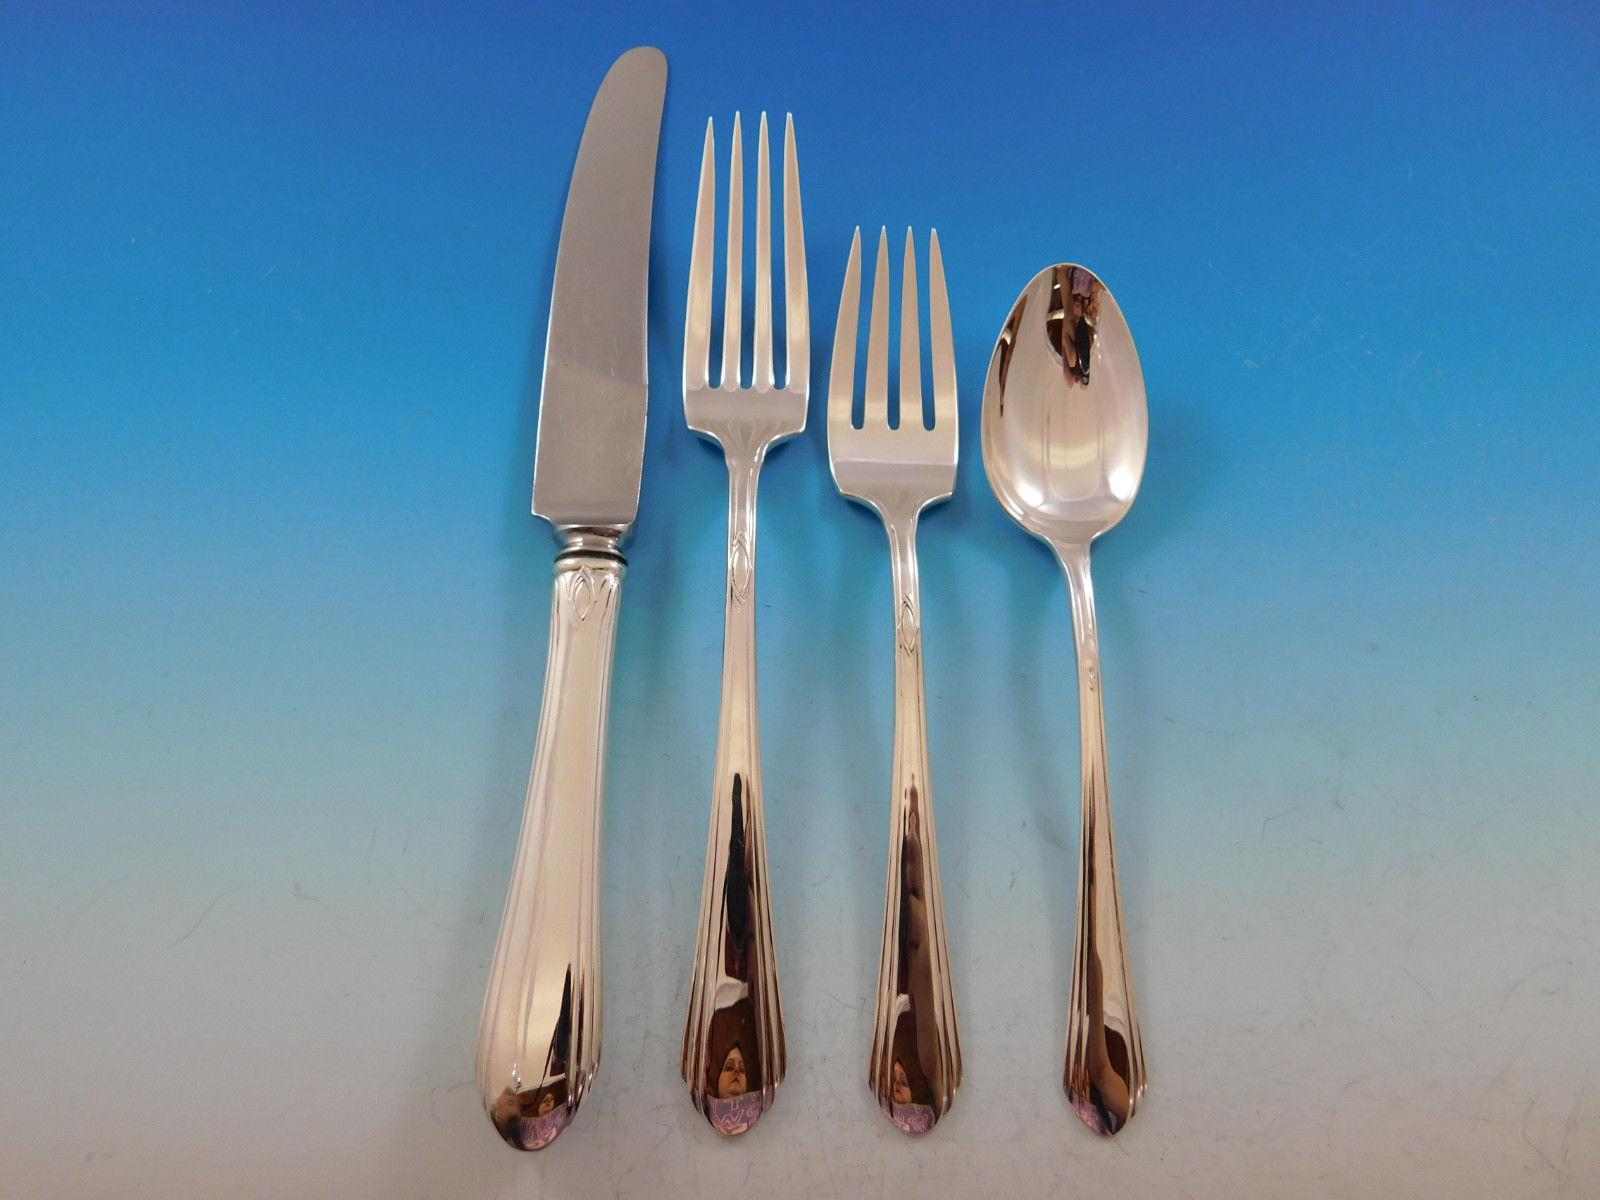 Lady Diana by Towle sterling silver flatware set - 56 pieces. This set includes:

Eight knives, 8 7/8